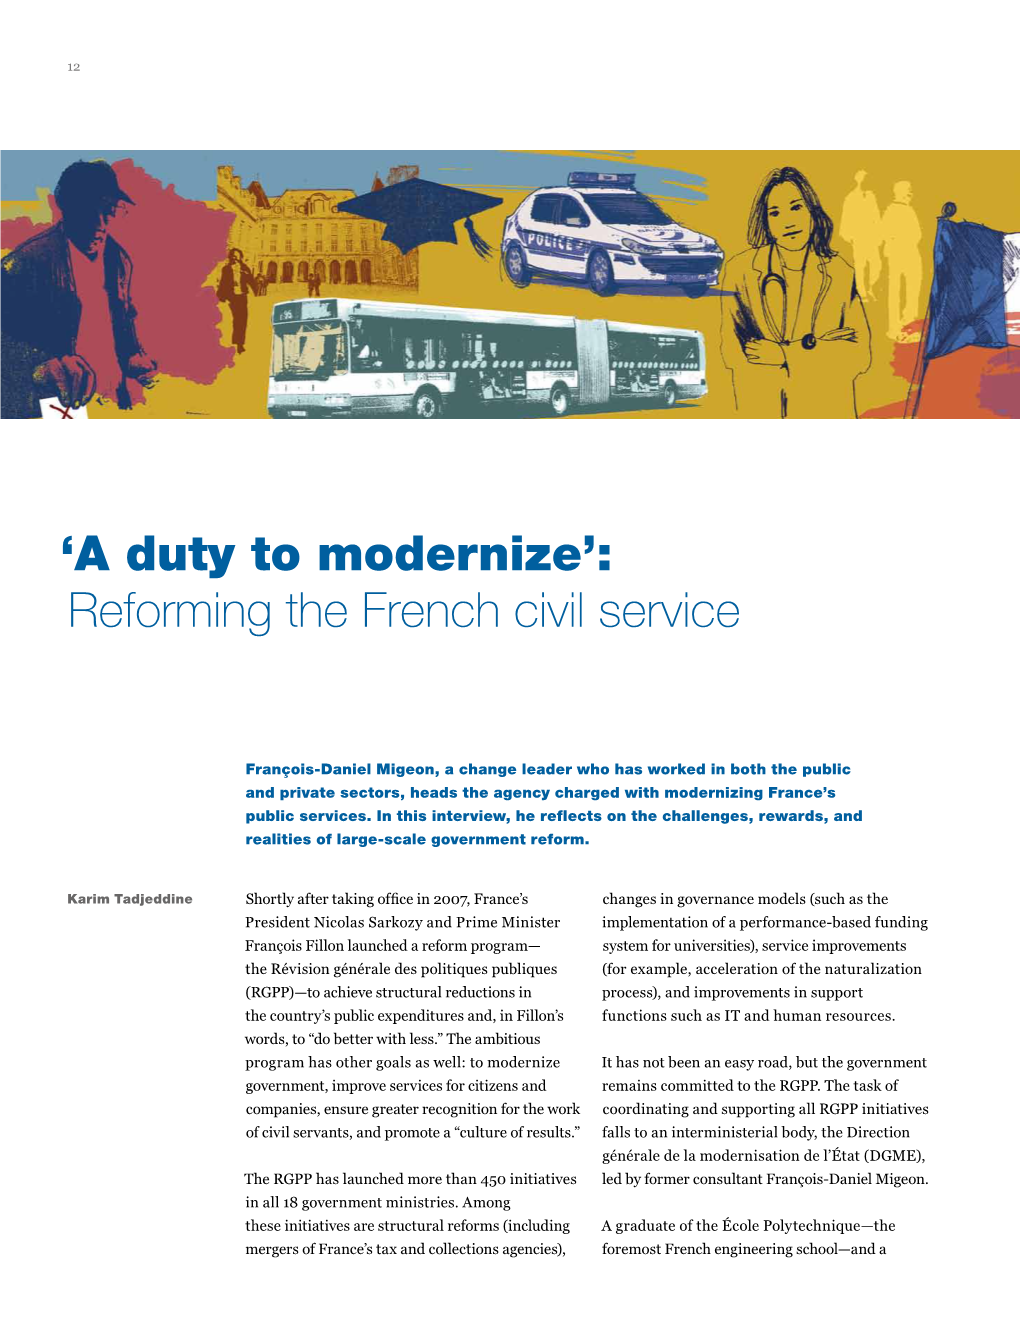 Reforming the French Civil Service